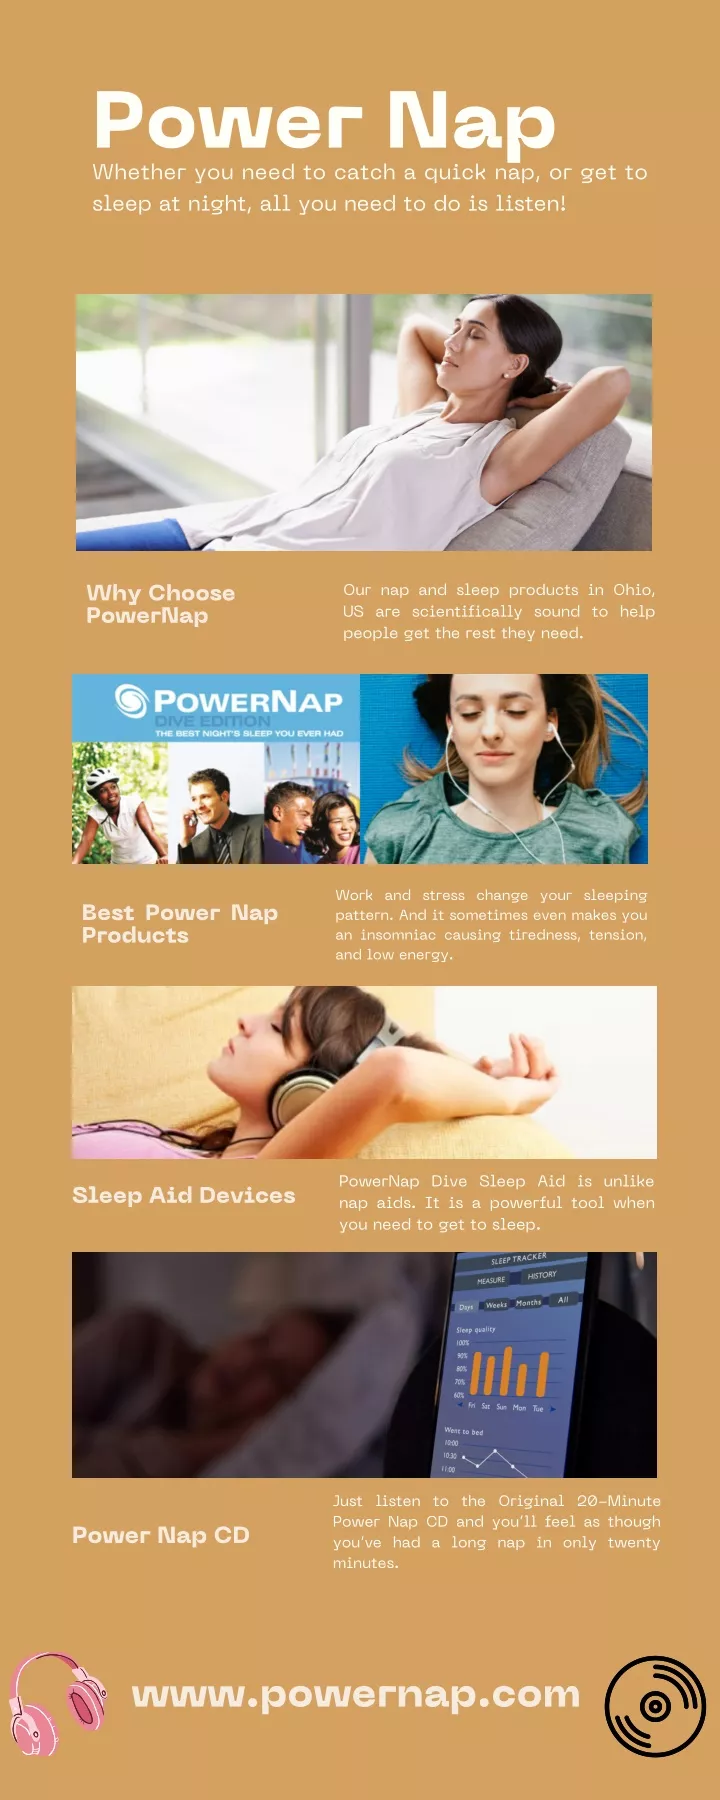 power nap whether you need to catch a quick